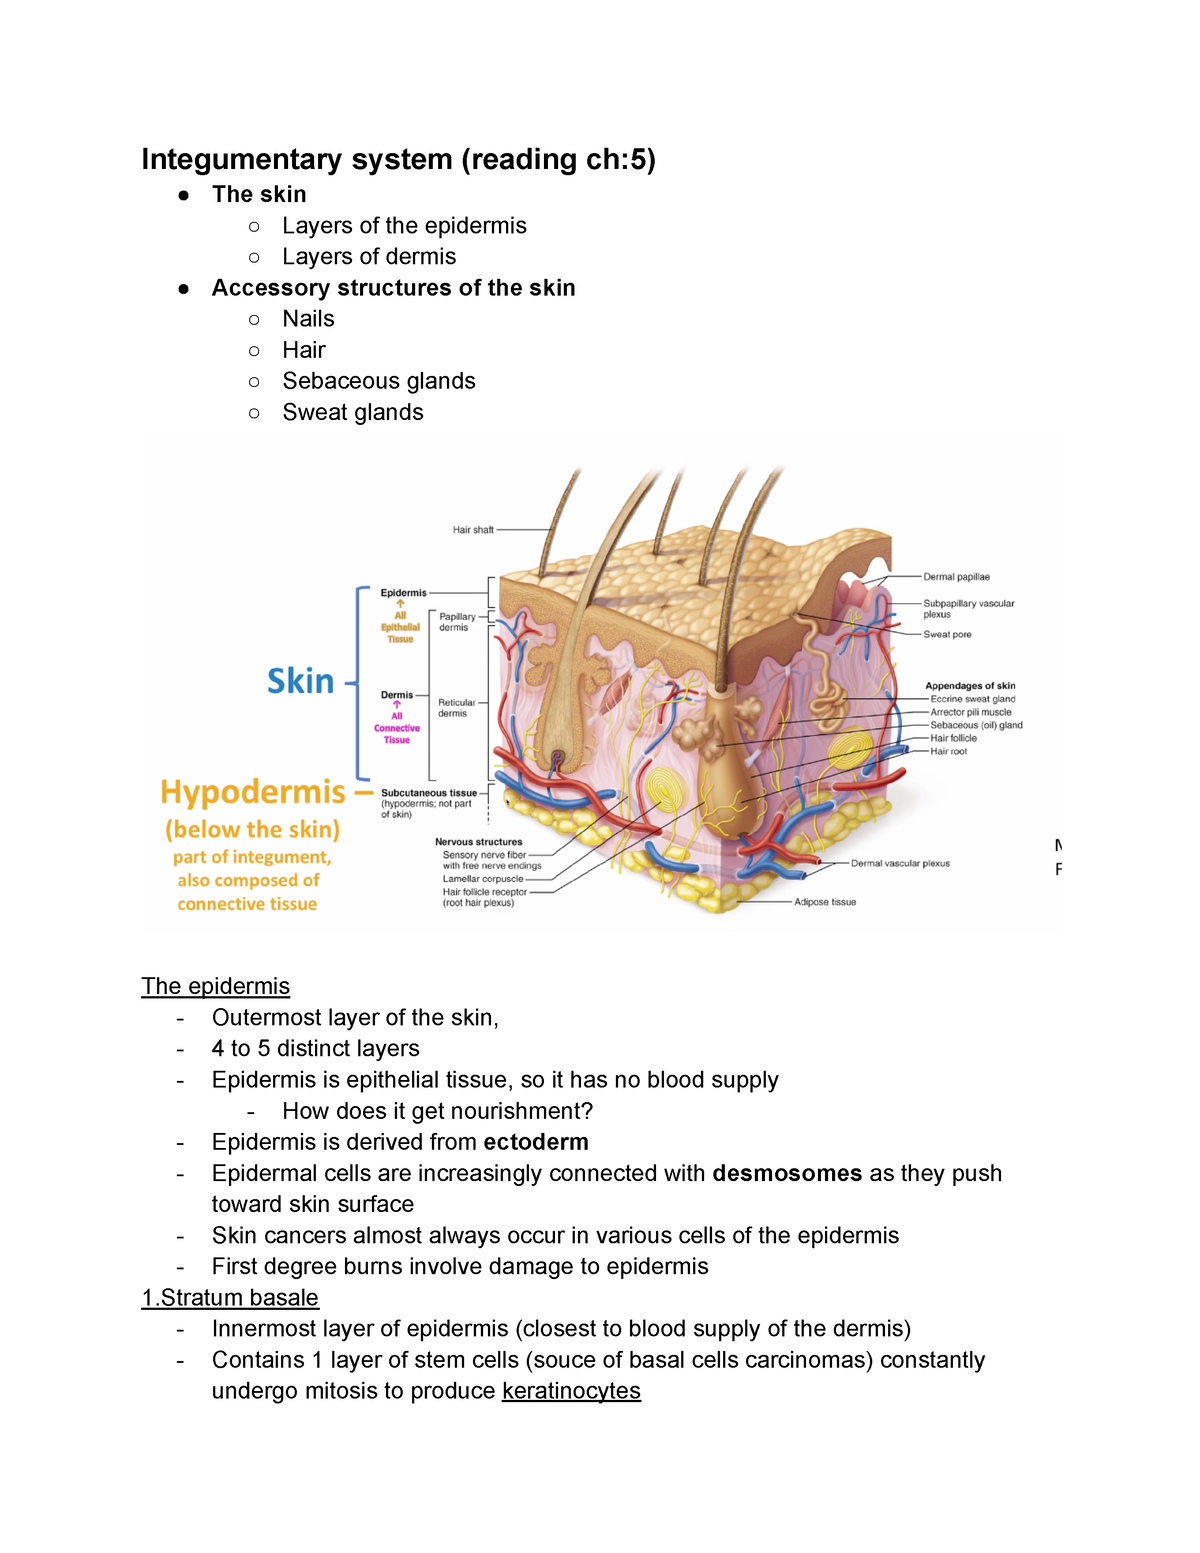 anatomy-ch-5-ch-5-integumentary-system-reading-ch-5-the-skin-layers-of-the-epidermis-studocu